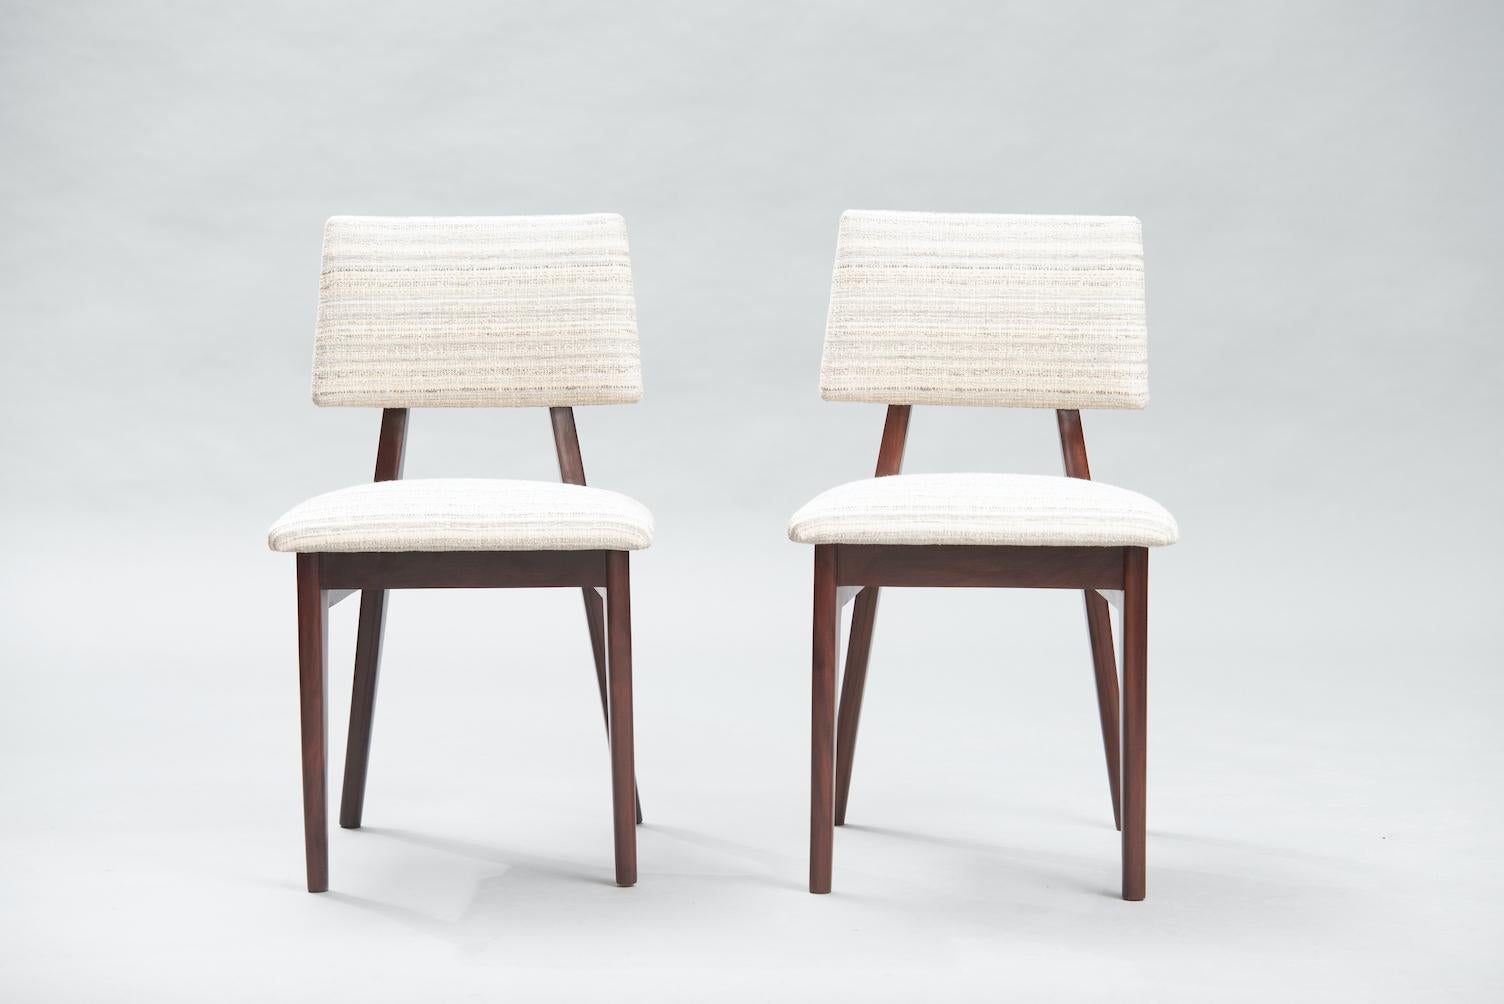 Set of four Mid-Century Modern solid mahogany dining chairs reupholstered in a striped-lined fabric.